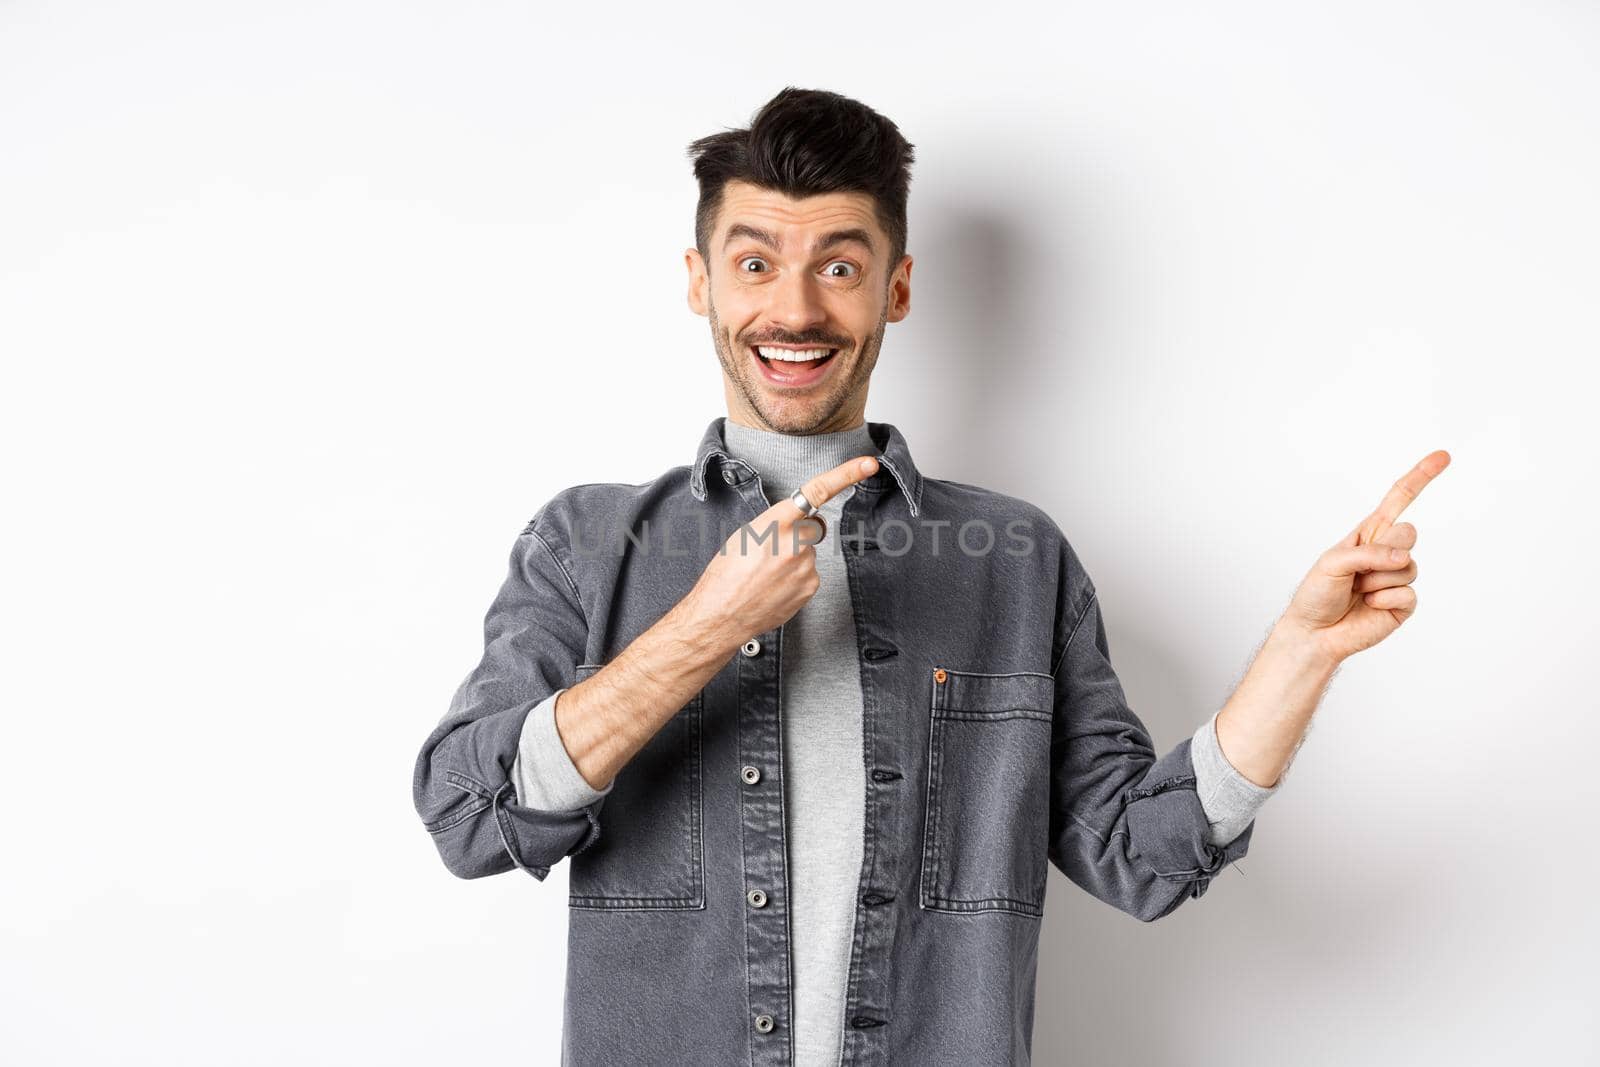 Look here. Happy stylish man smiling, pointing fingers right at empty space, showing cool promo offer, standing in denim jacket on white background.